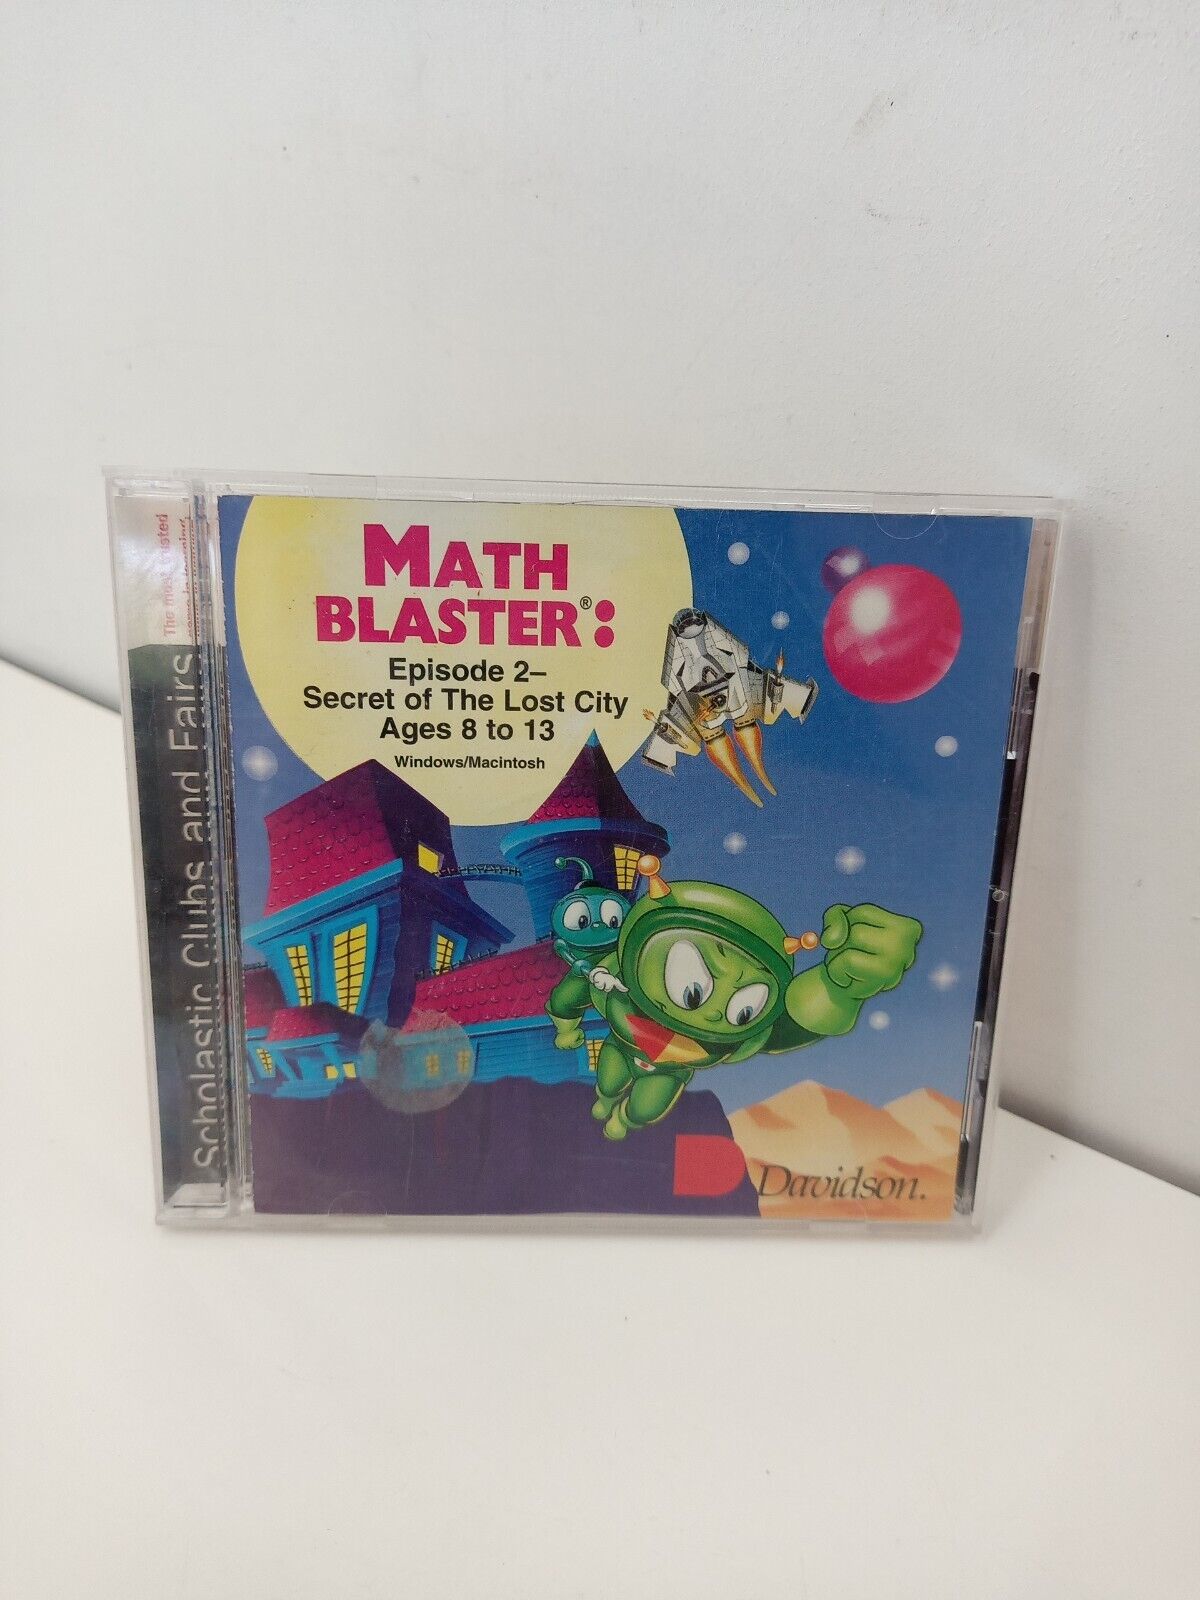 Math Blaster Ages 8-13 Educational PC CD-ROM Episode 2 Secret Of The Lost City